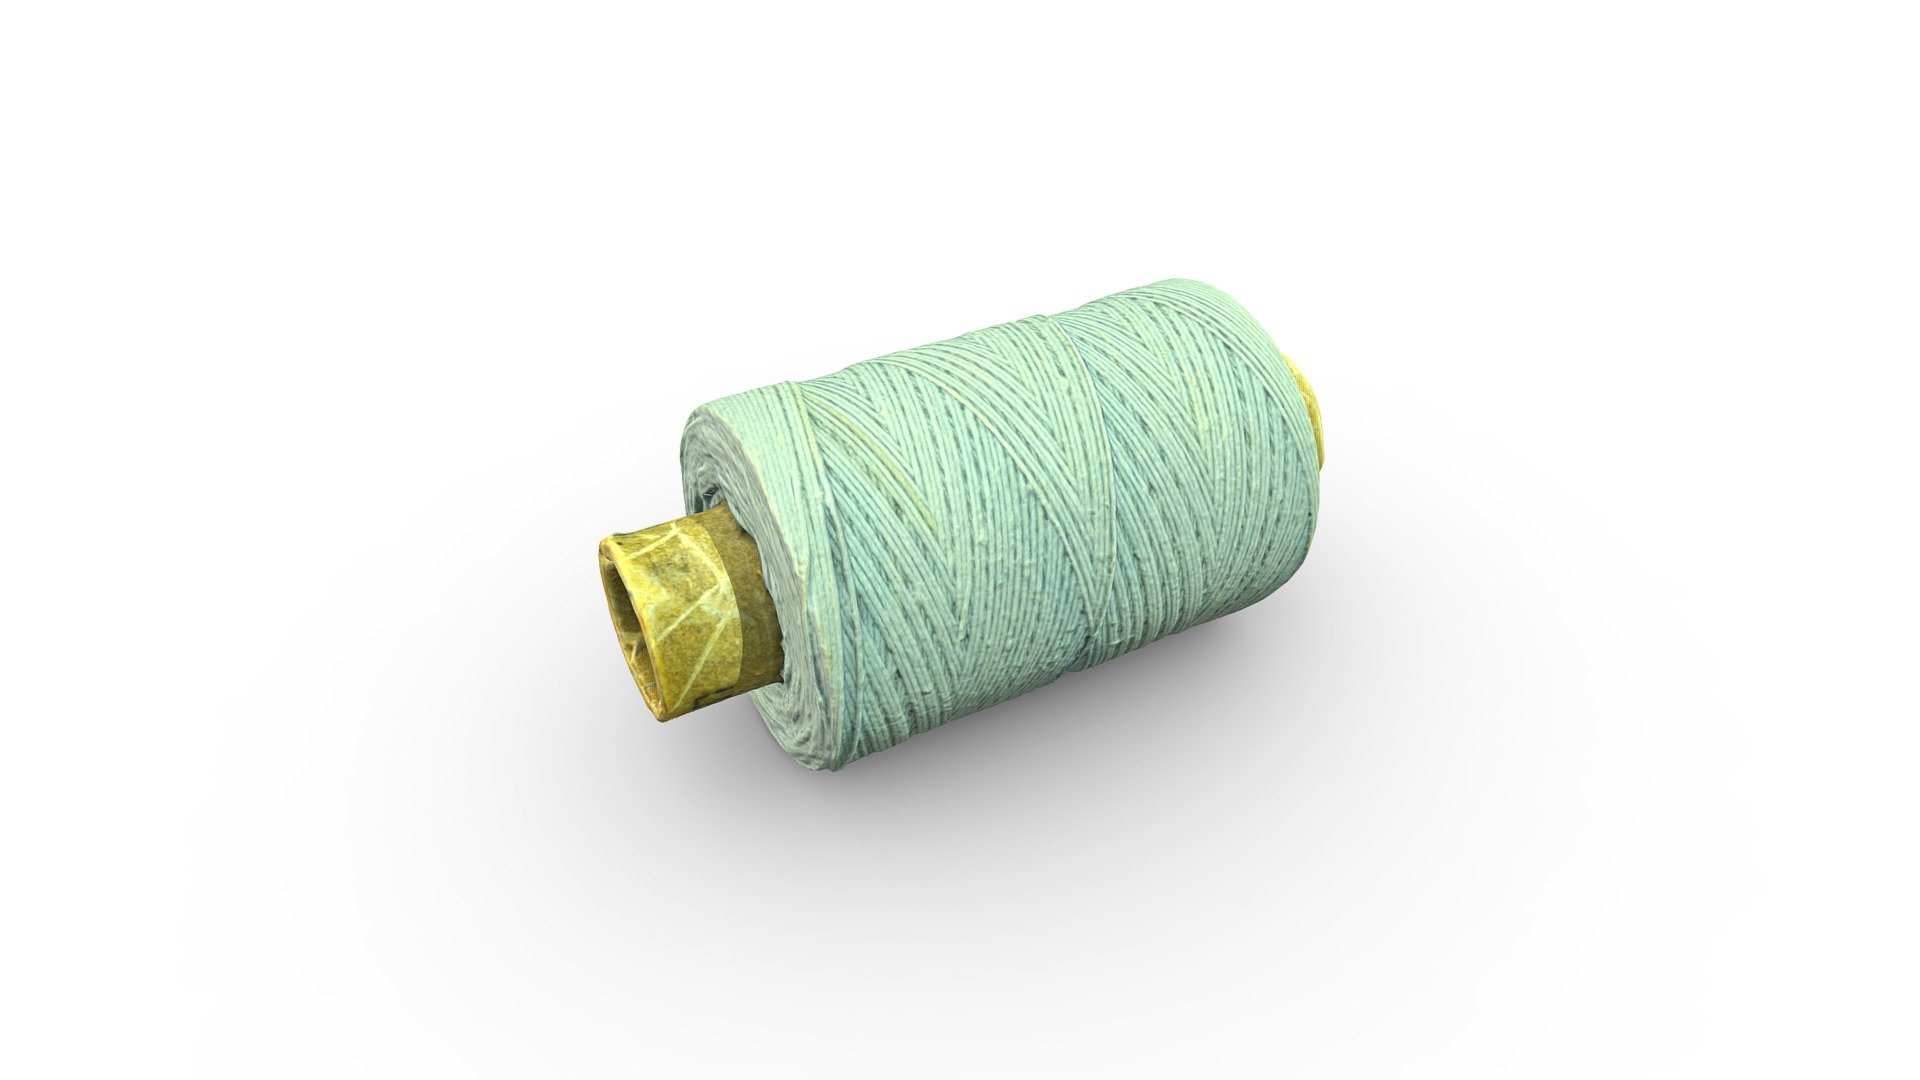 High-poly spool of blue thread photogrammetry scan. PBR texture maps 4096x4096 px. resolution for metallic or specular workflow. Scan from real spool, high-poly 3D model, 4K resolution textures 3d model